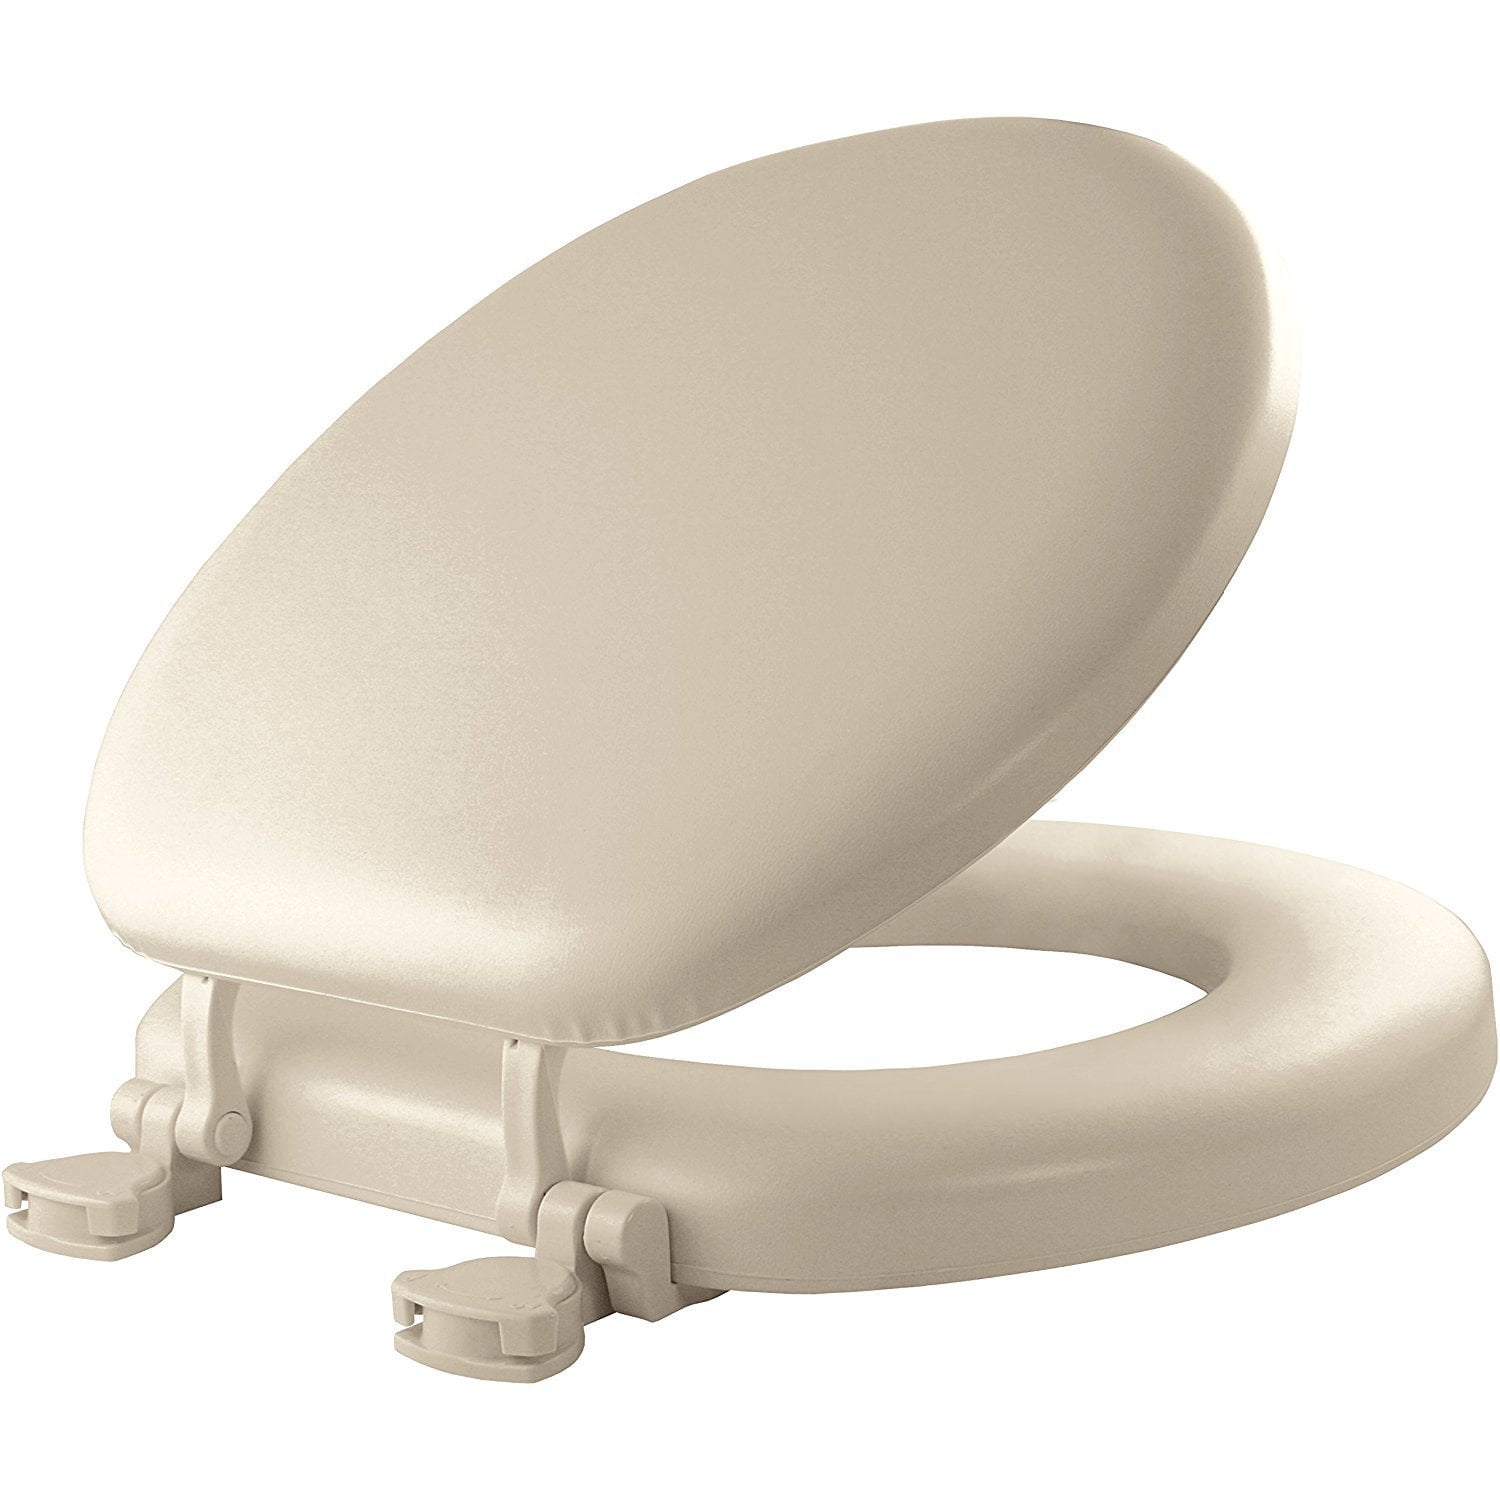 MAYFAIR  13EC 000 Soft Toilet Seat Easily Removes ROUND Padded with Wood Core, 